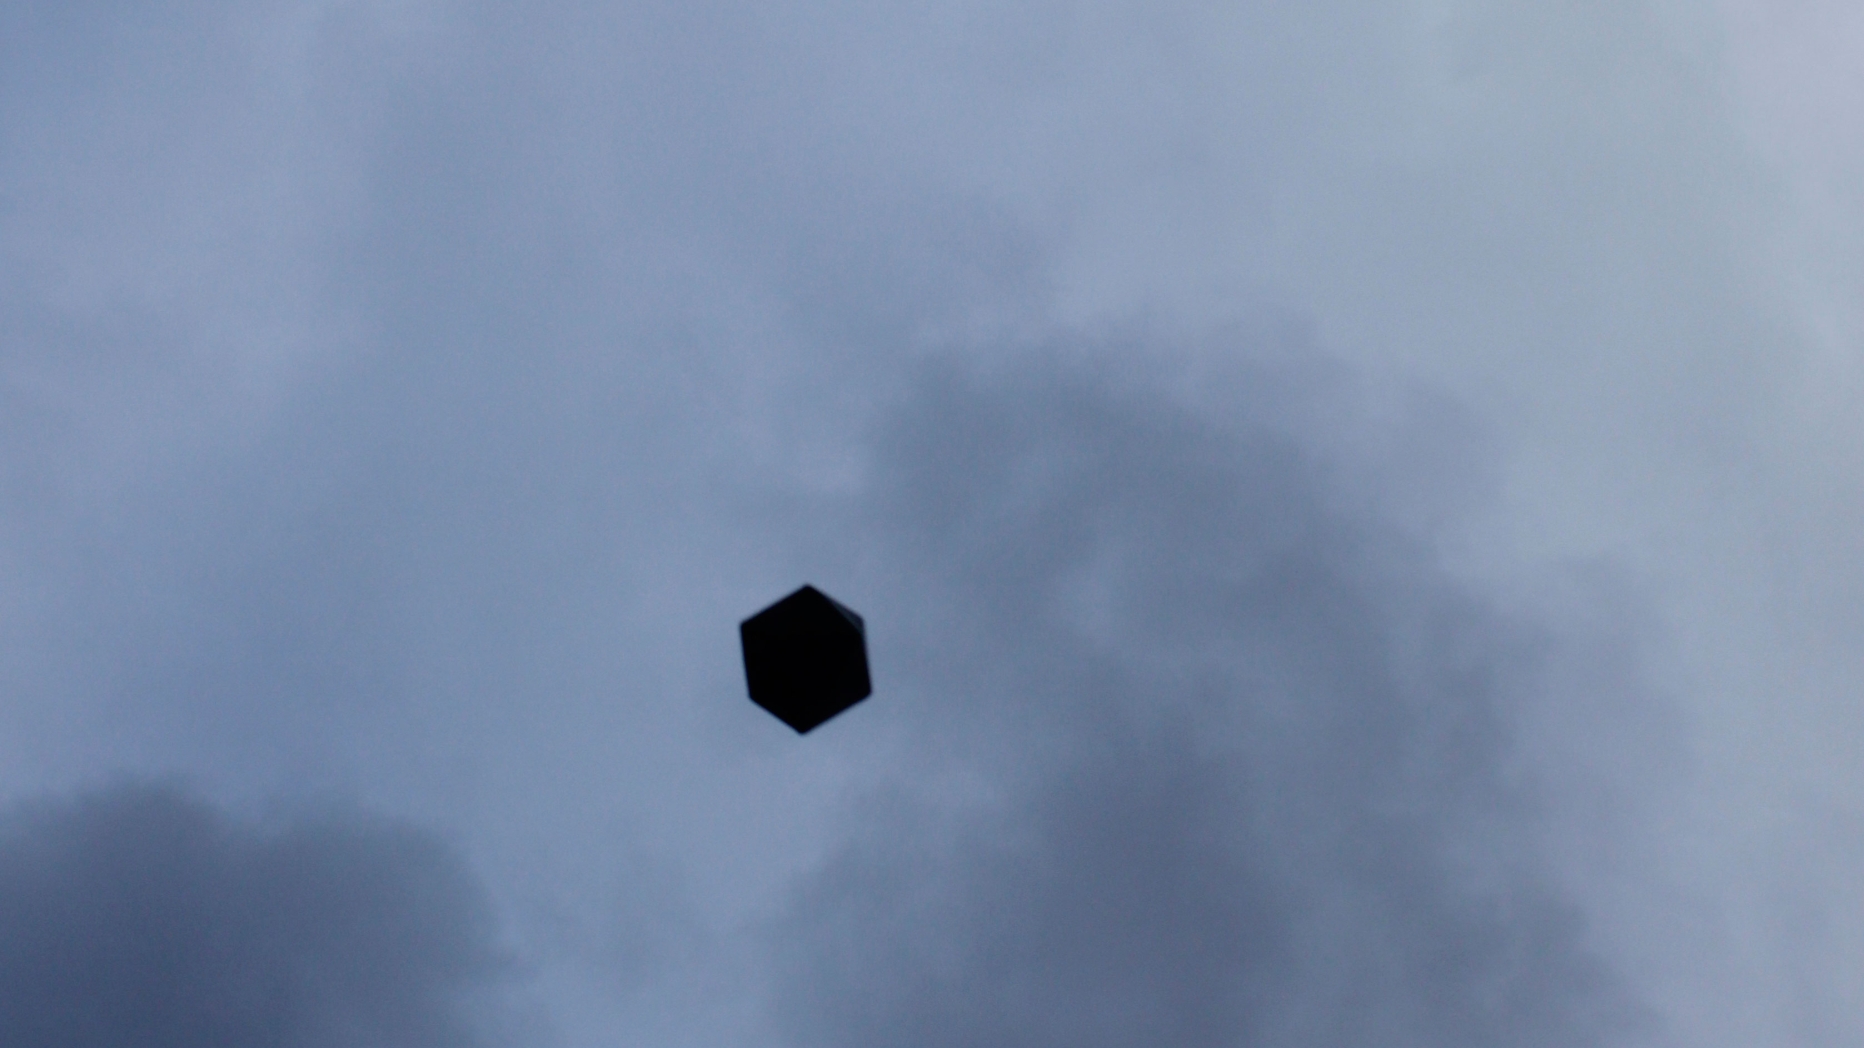 Image of clouded sky with a black hexagon in the middle.